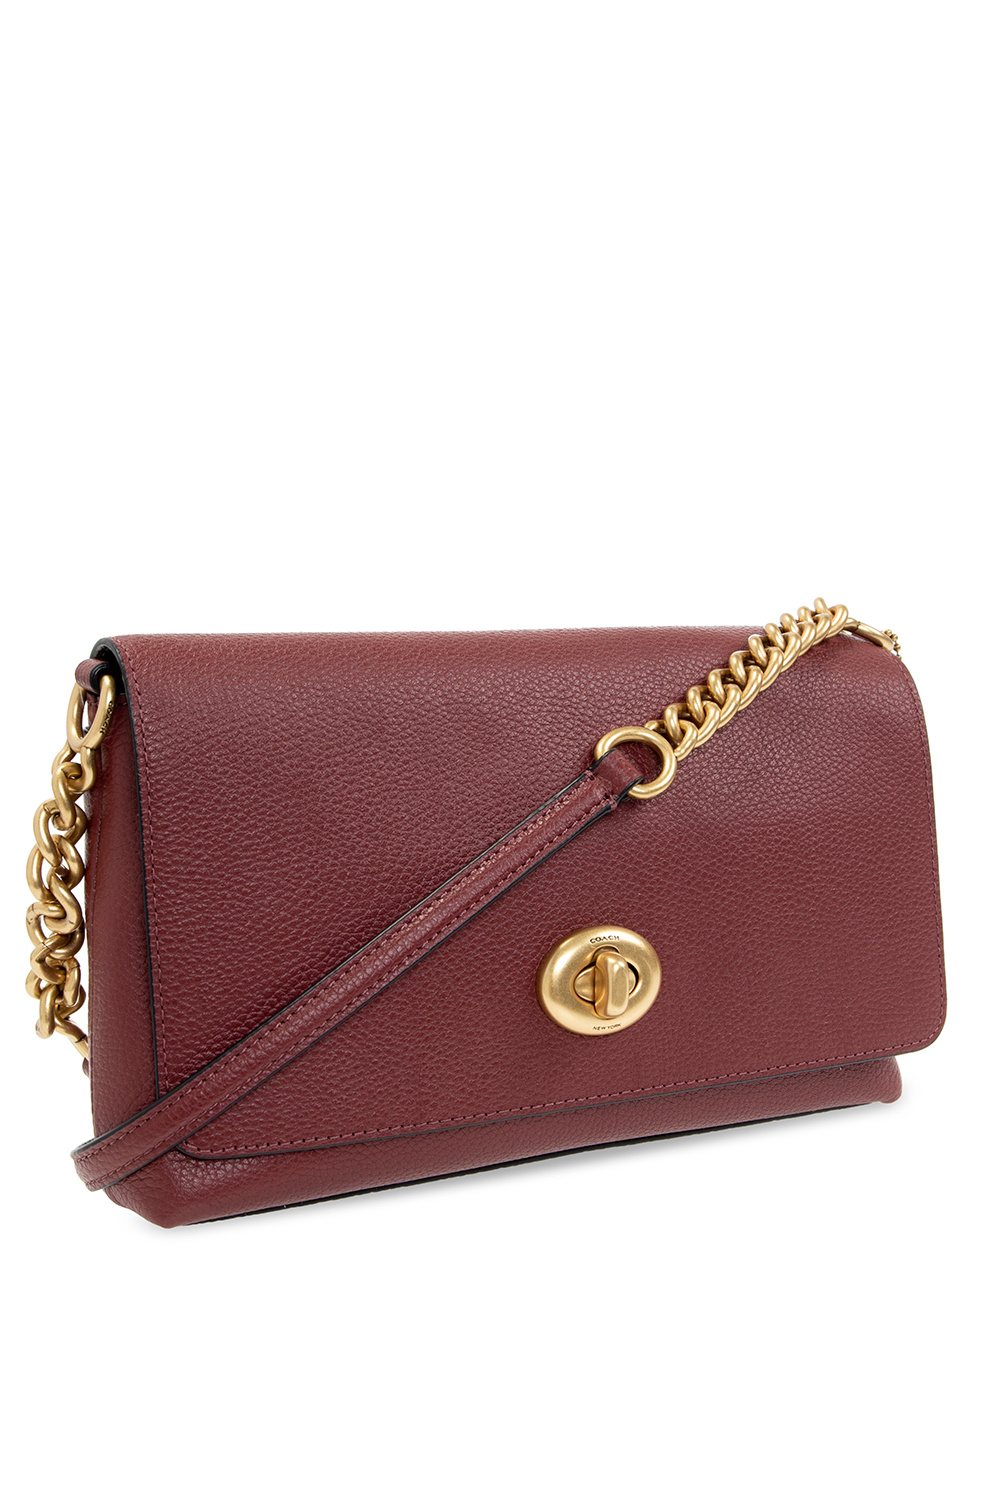 COACH Cross Town Leather Cross-Body Bag in Red